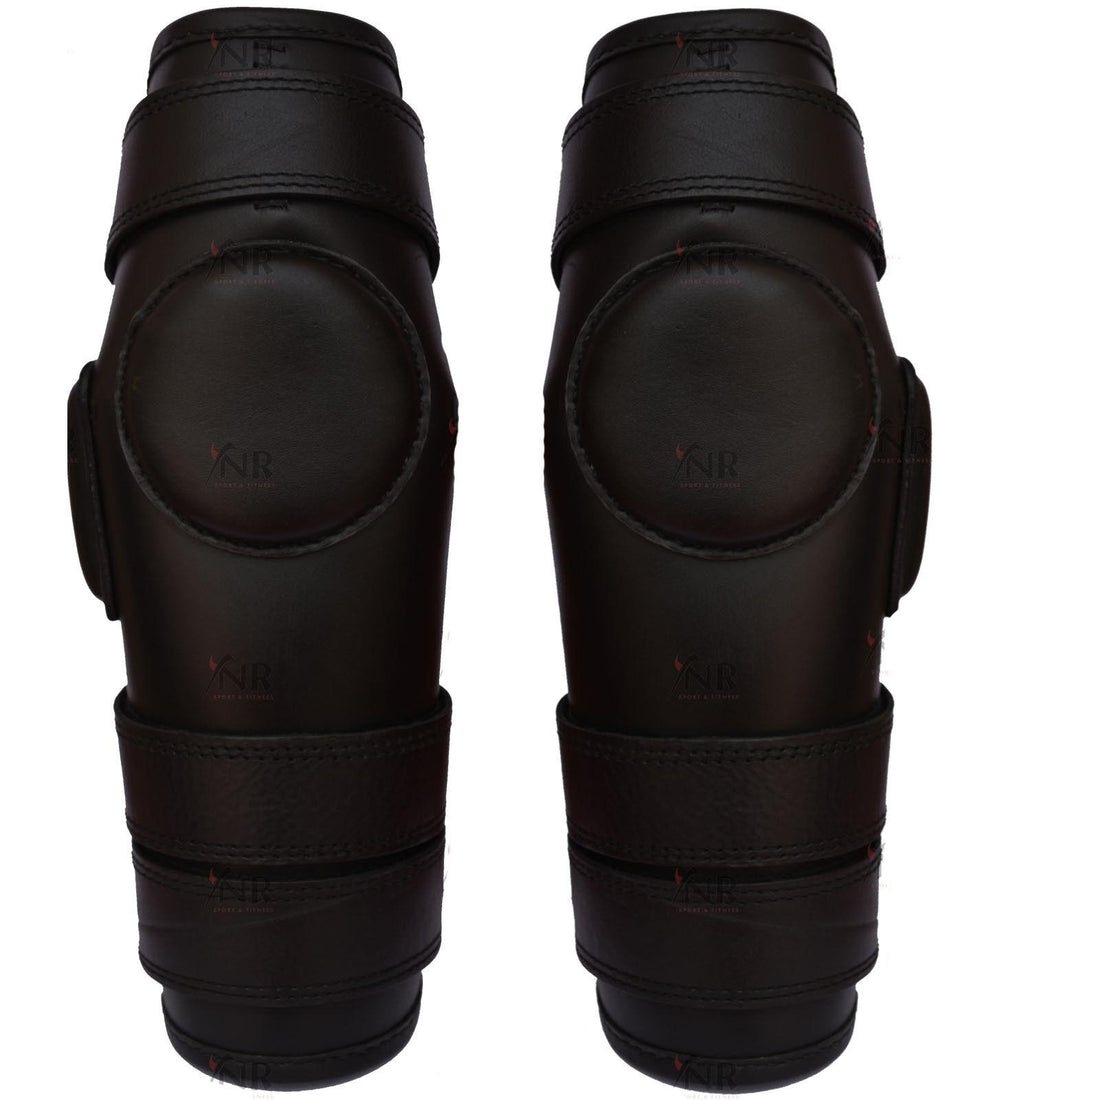 YNR 3 STRAP POLO & RIDING KNEE GUARDS REAL LEATHER PADDED-SUPREME QUALITY